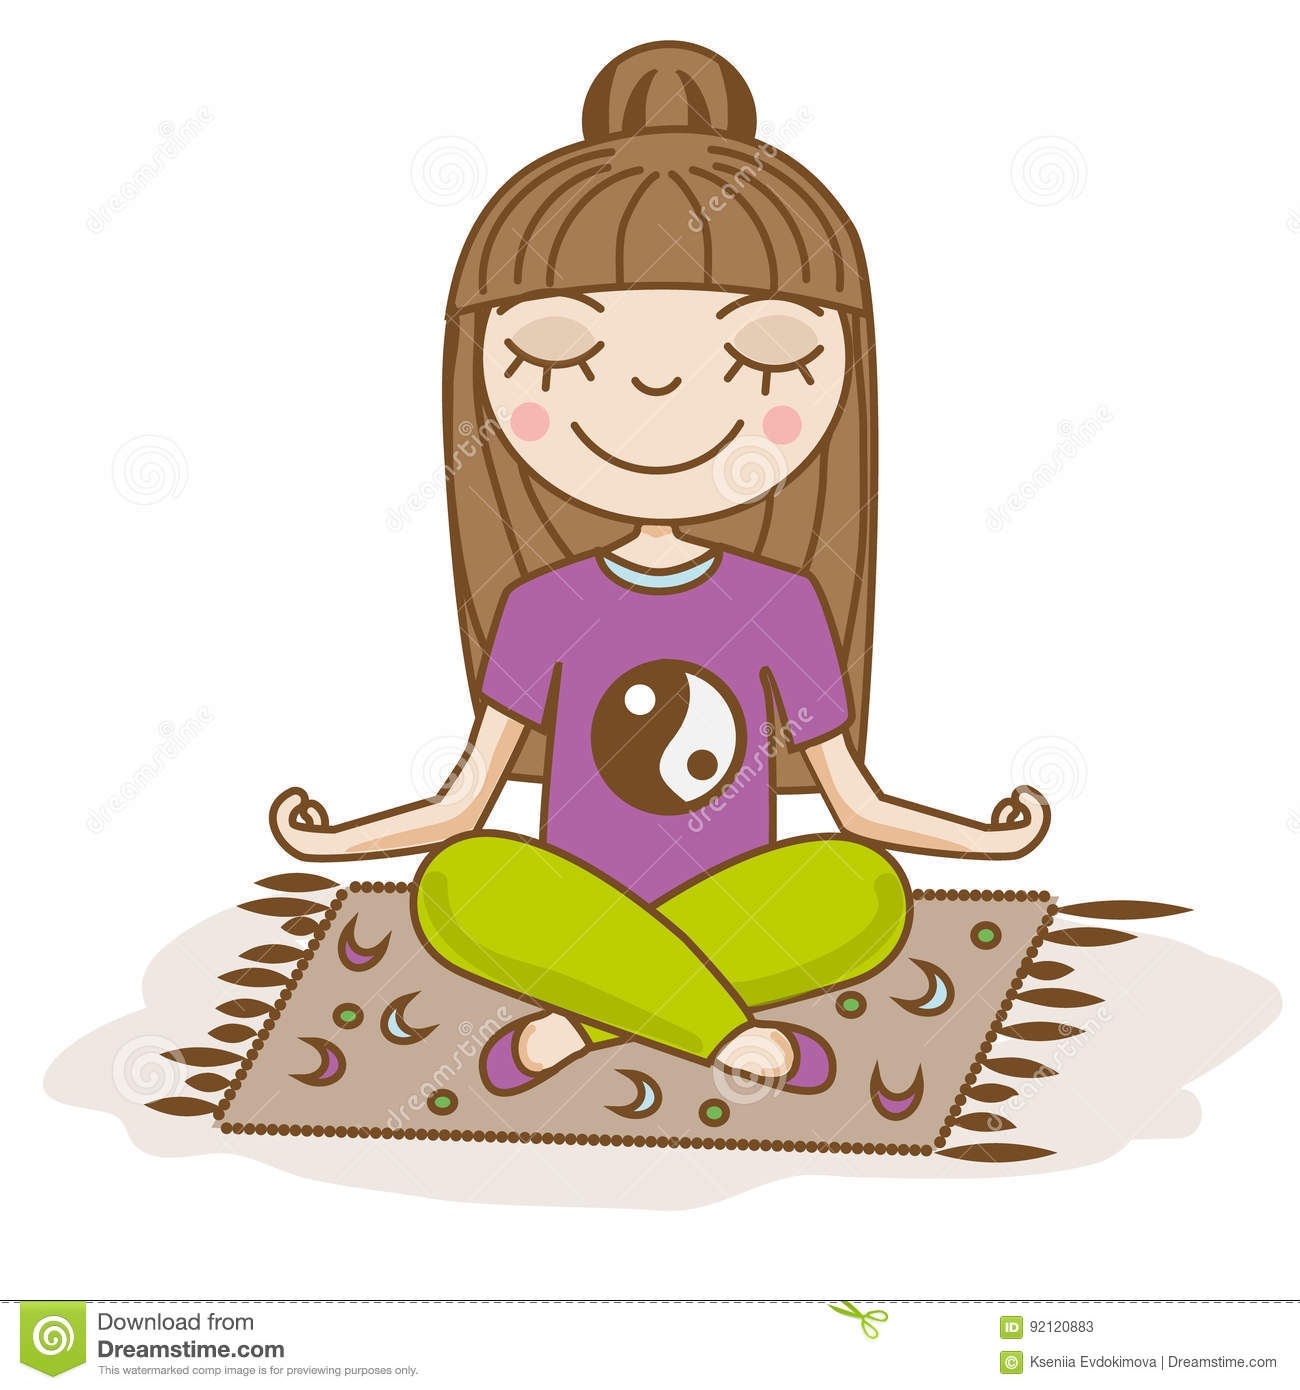 Awesome gallery digital collection. Calm clipart